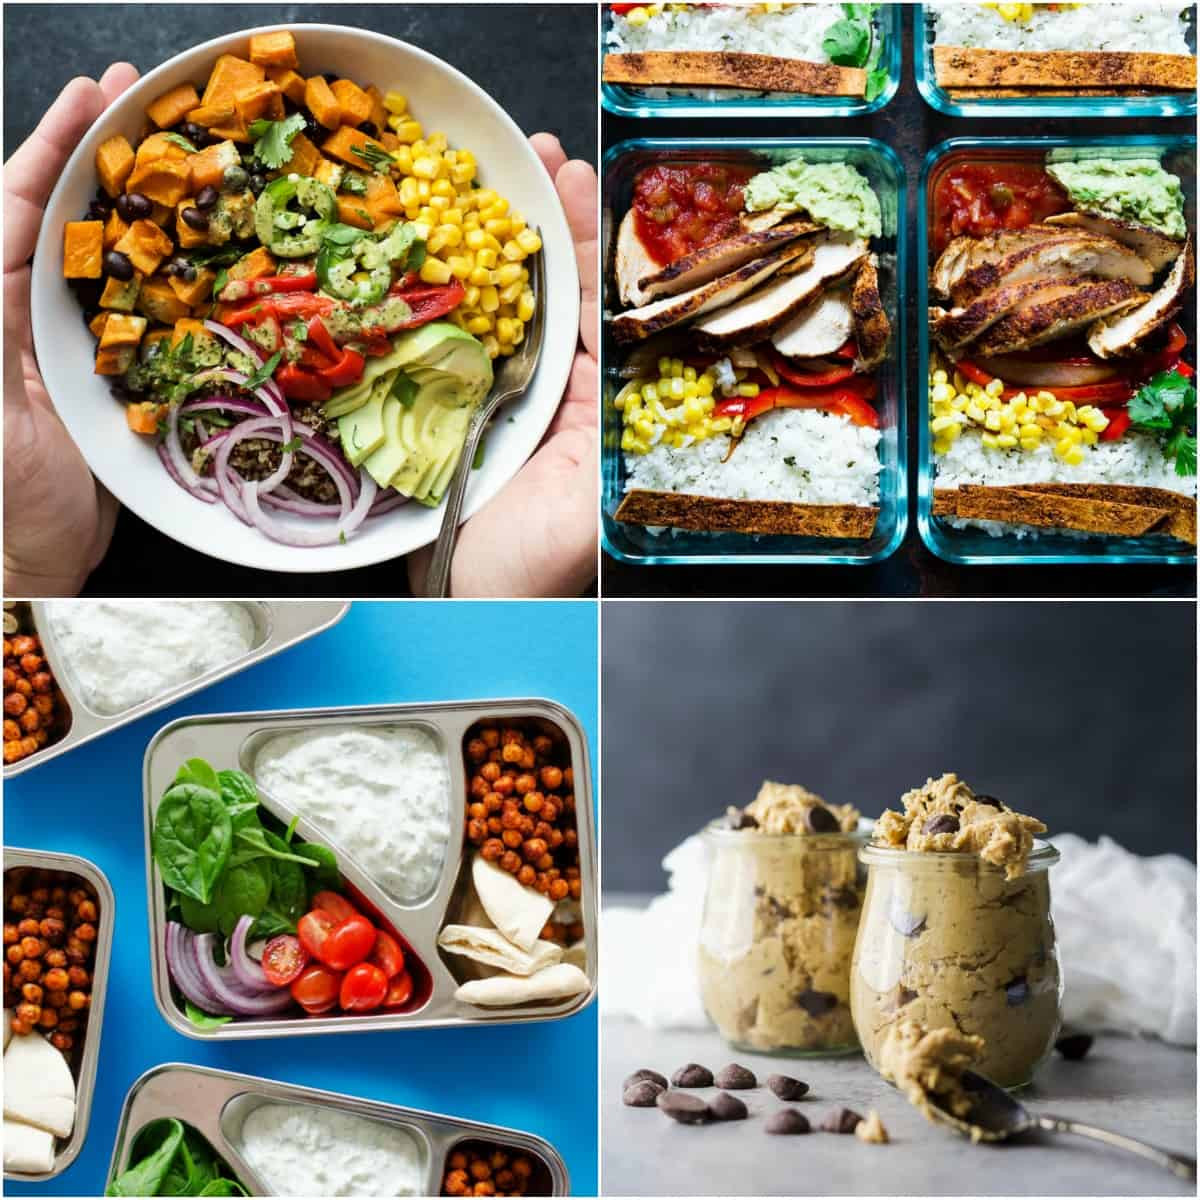 Breakfast Lunch Dinner
 23 of the BEST Meal Prep Recipes for Breakfast Lunch